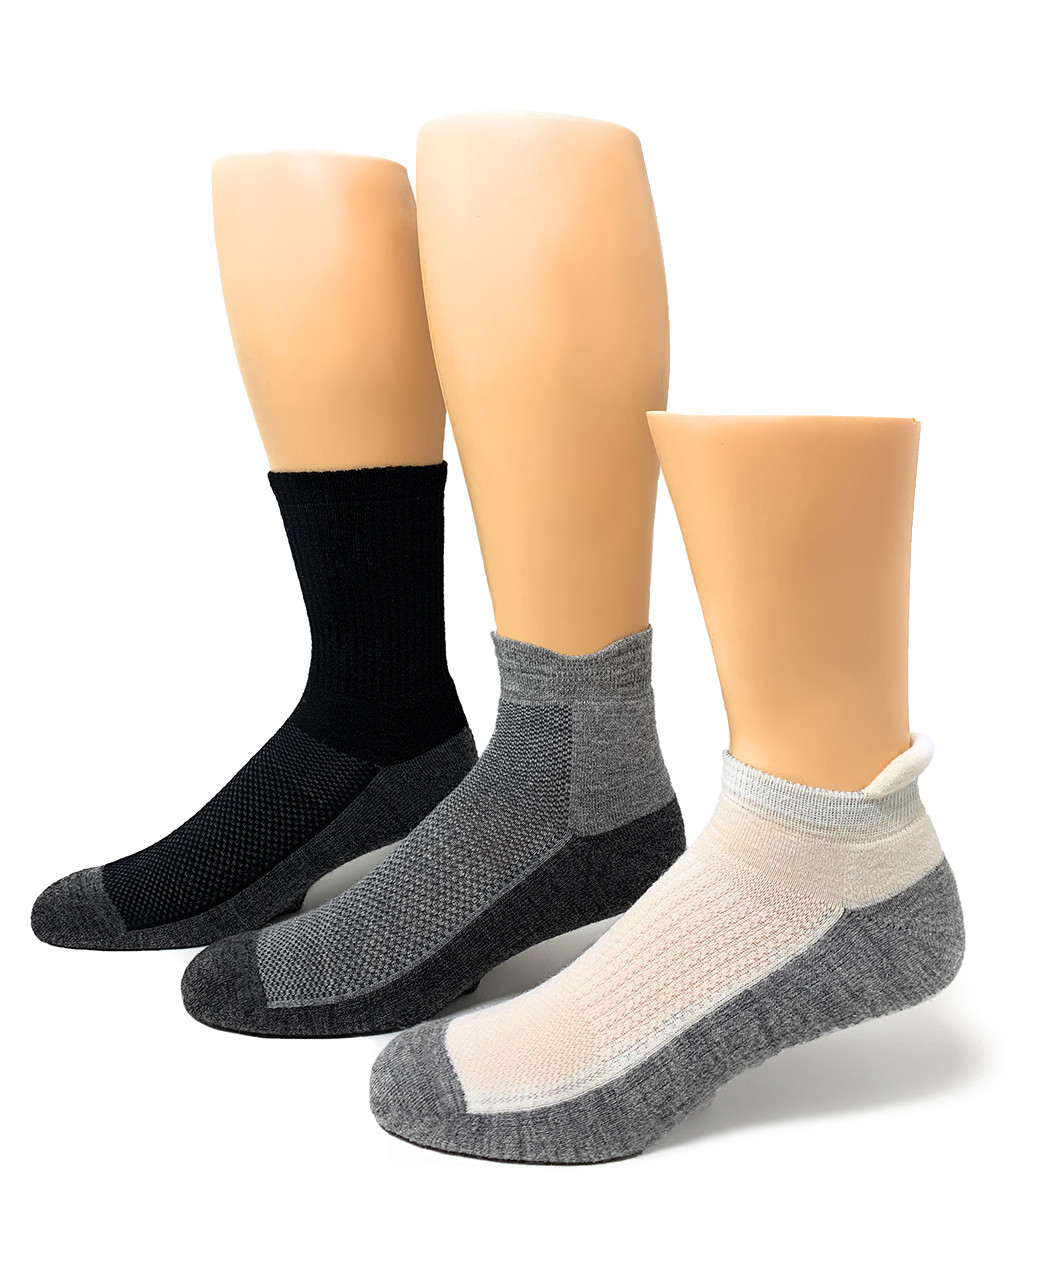 Comfysocks is your high performance sock supplier